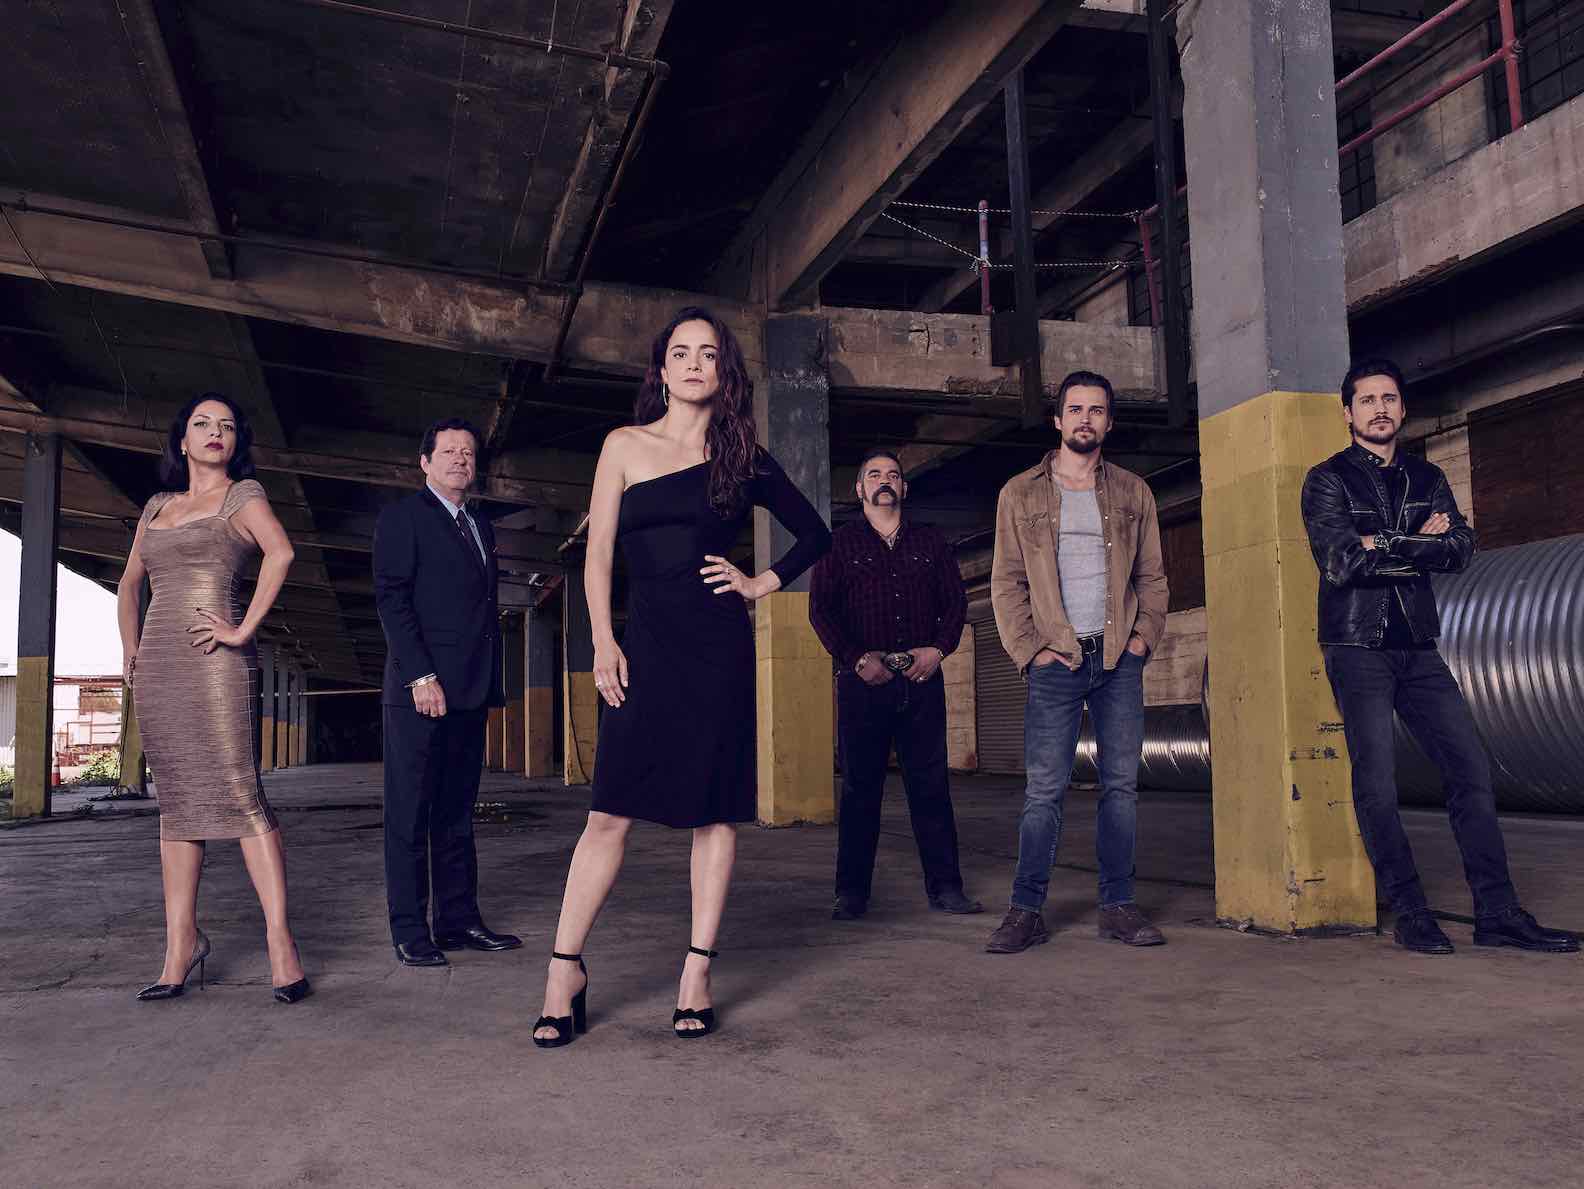 While we won't be getting 'Queen of the South' season 5 until sometime in 2021, we're desperate to guess what's going to happen, and who's fate is sealed.